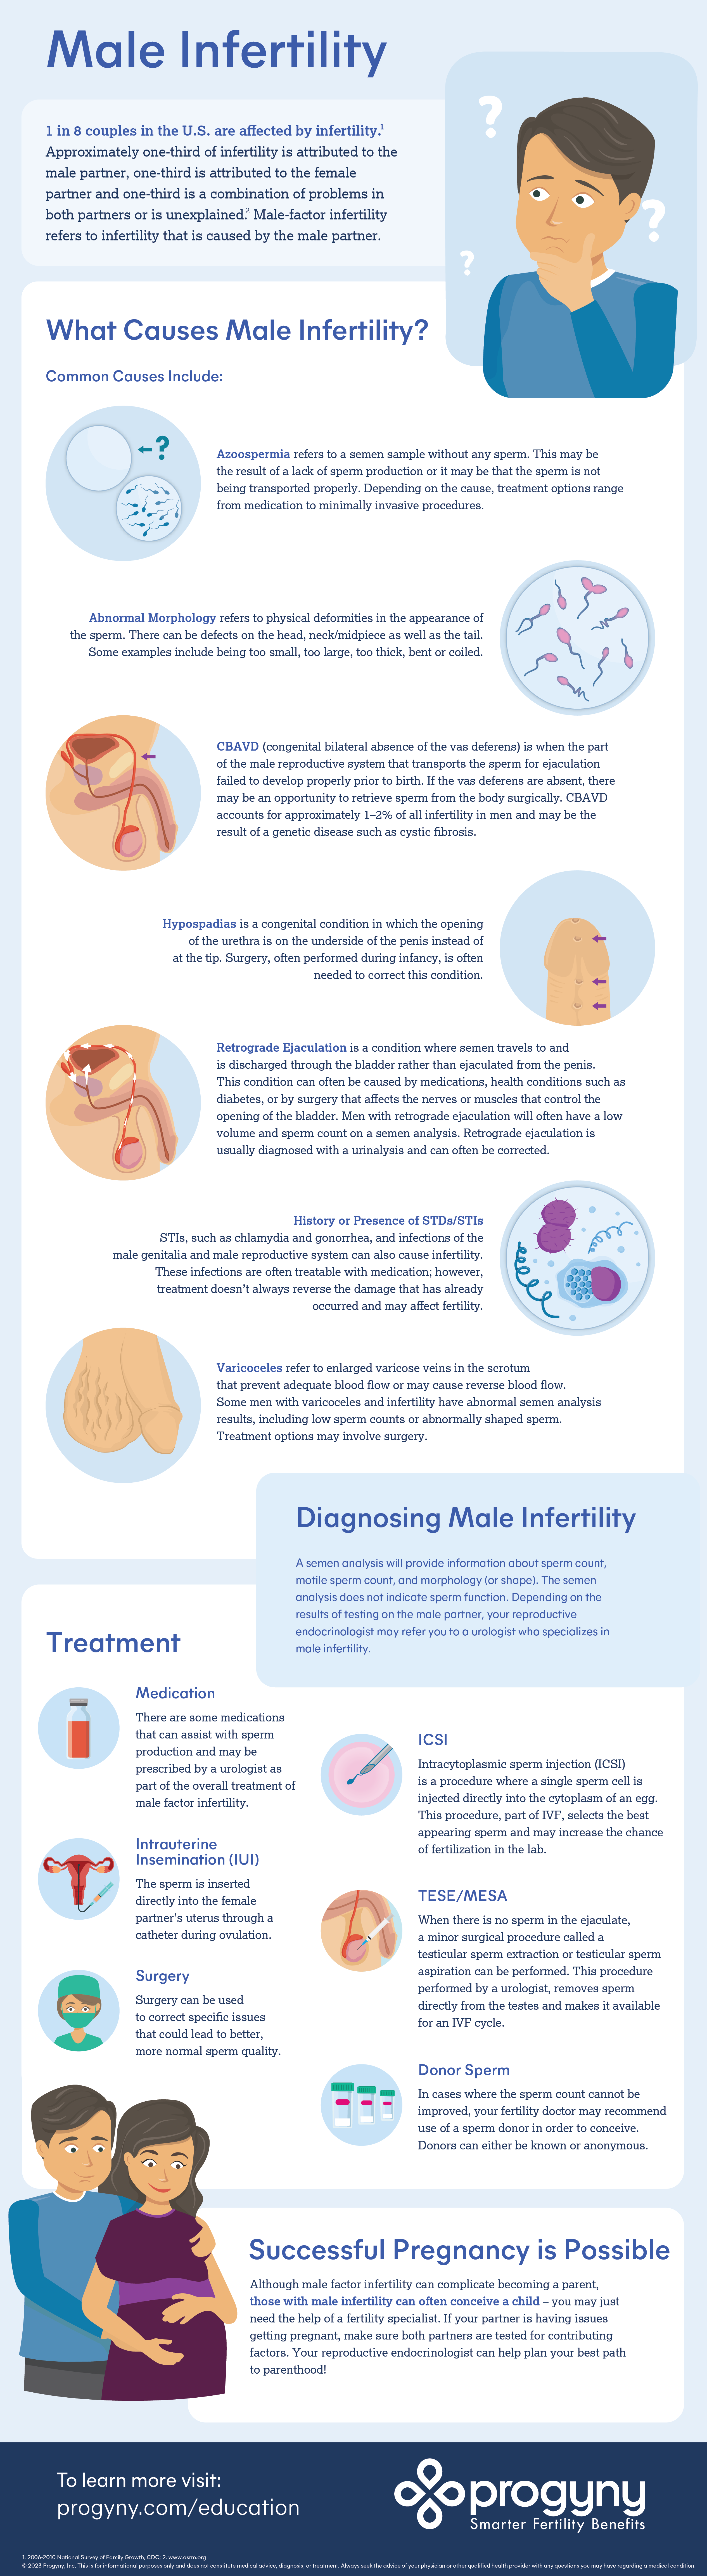 Illustrated infographic detailing male infertility causes, diagnosis and treatment